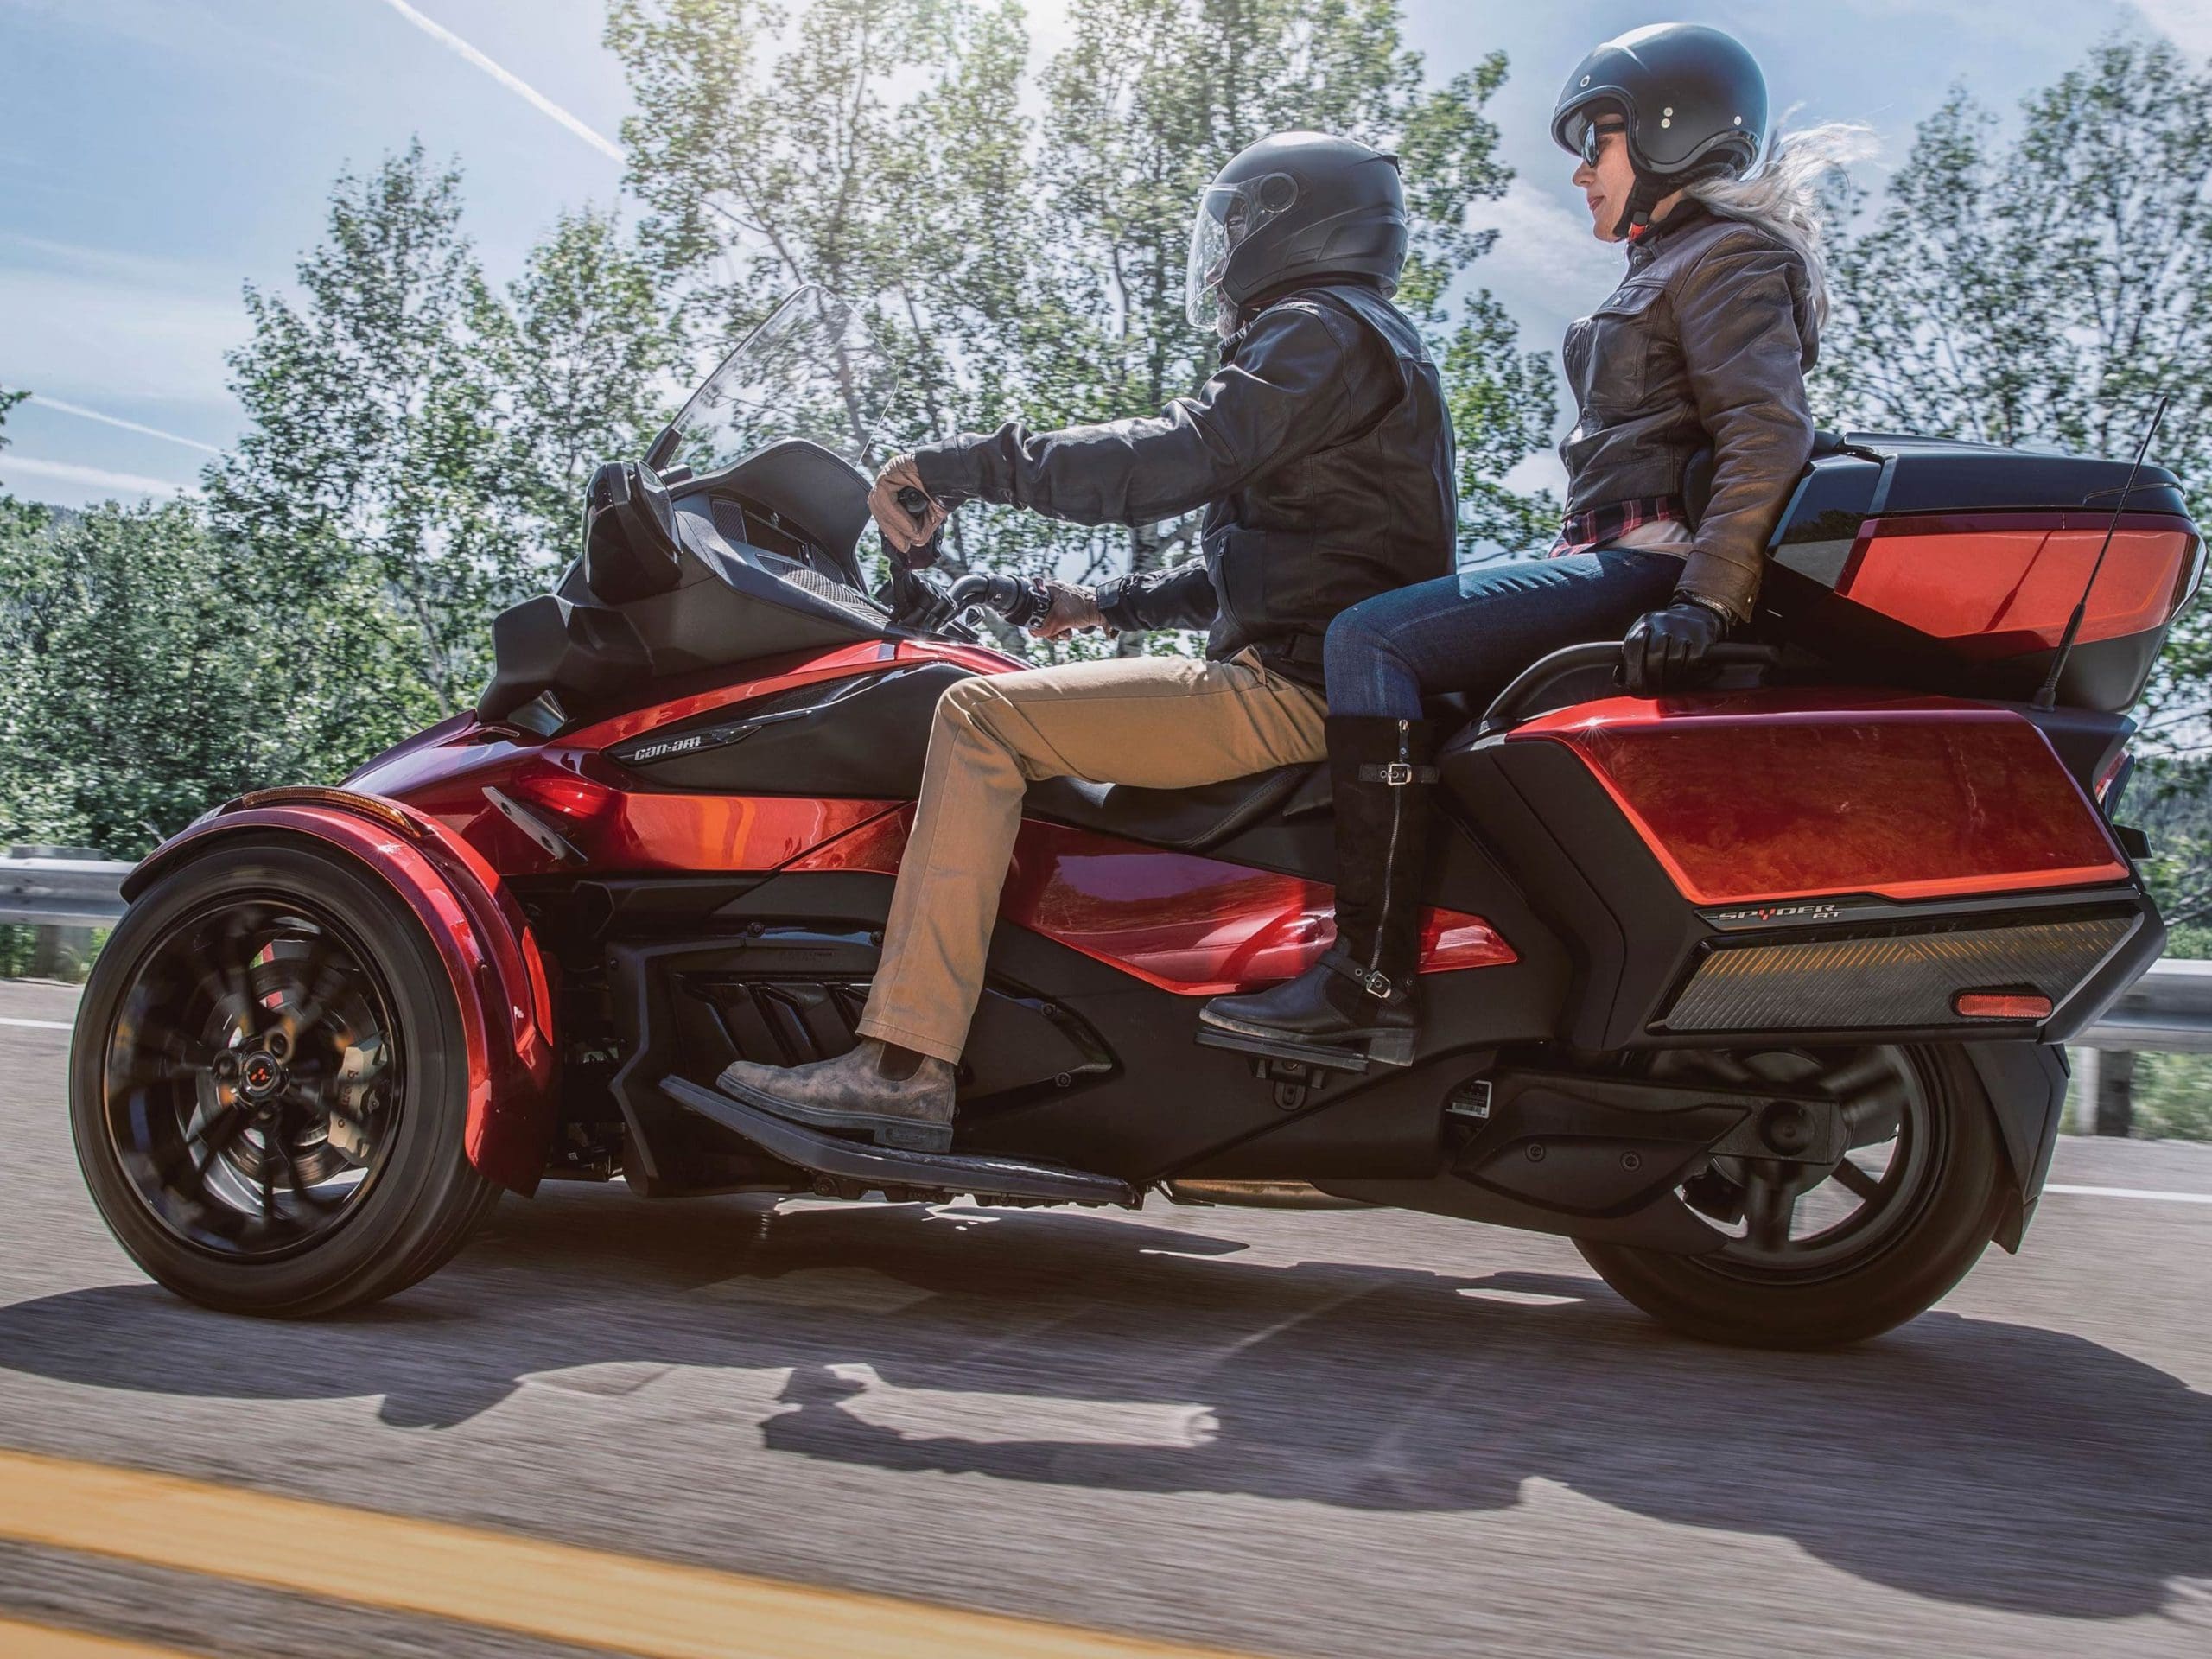 2021 Can Am Spyder Rt Limited Model Overview Roberts Adventure